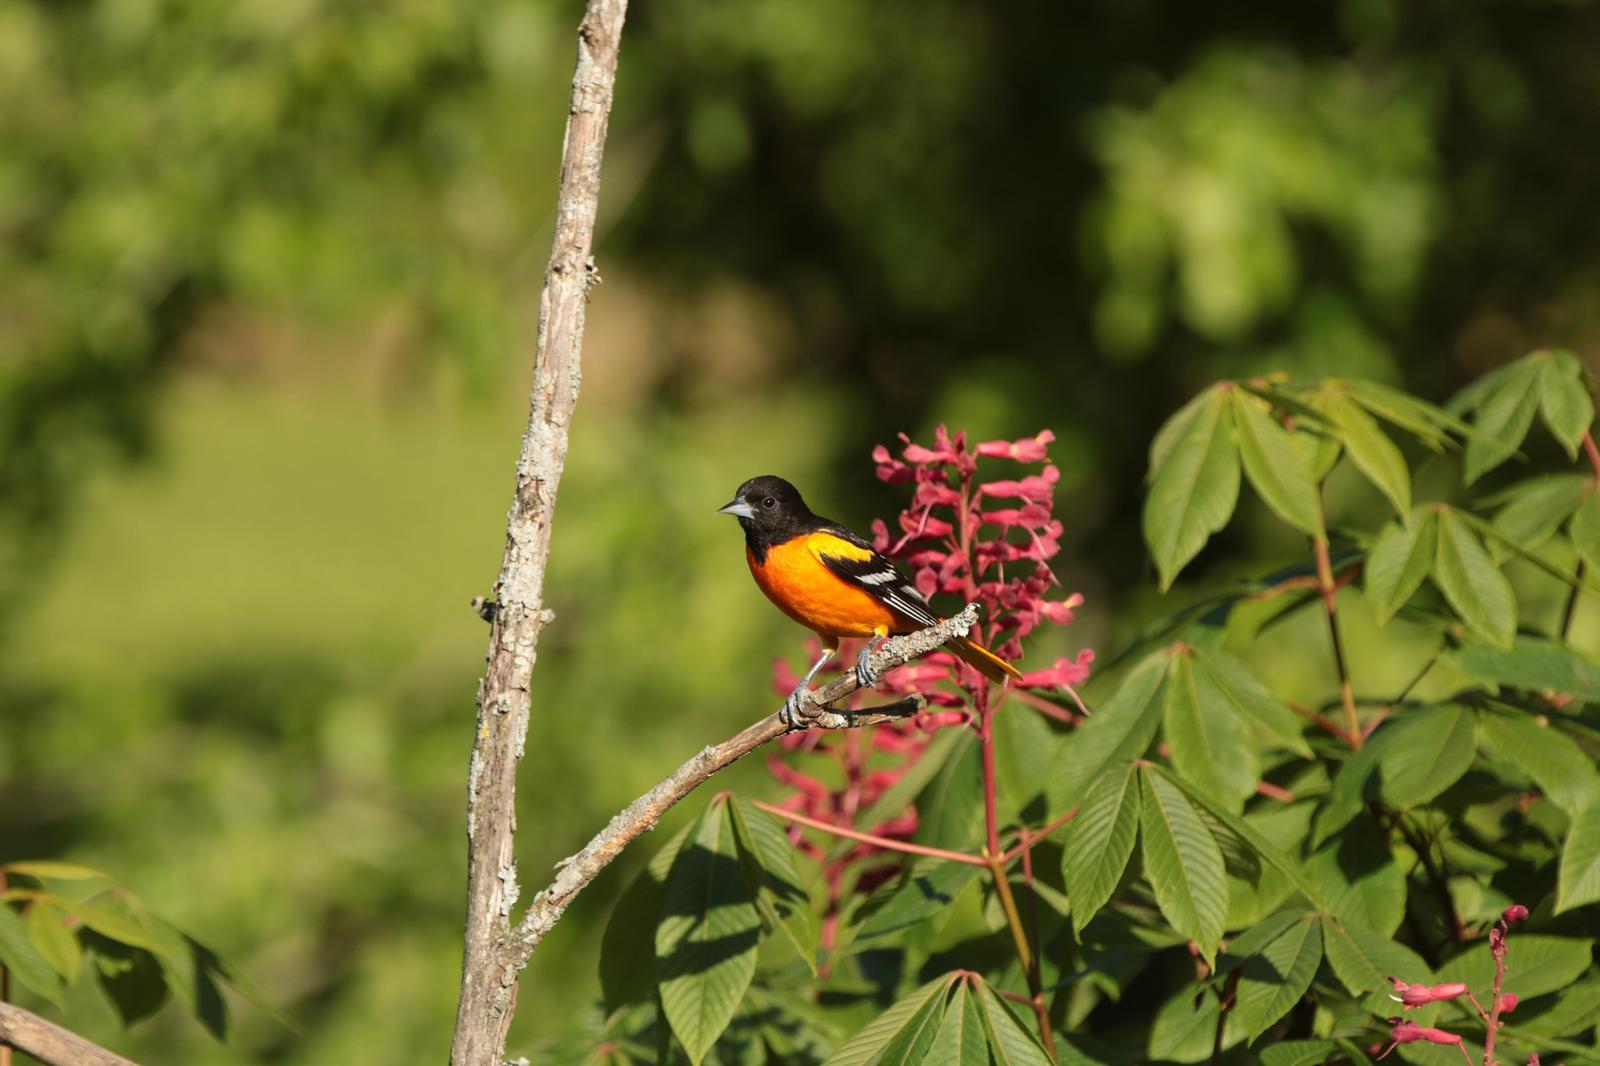 Baltimore Oriole Photo by Kristy Baker